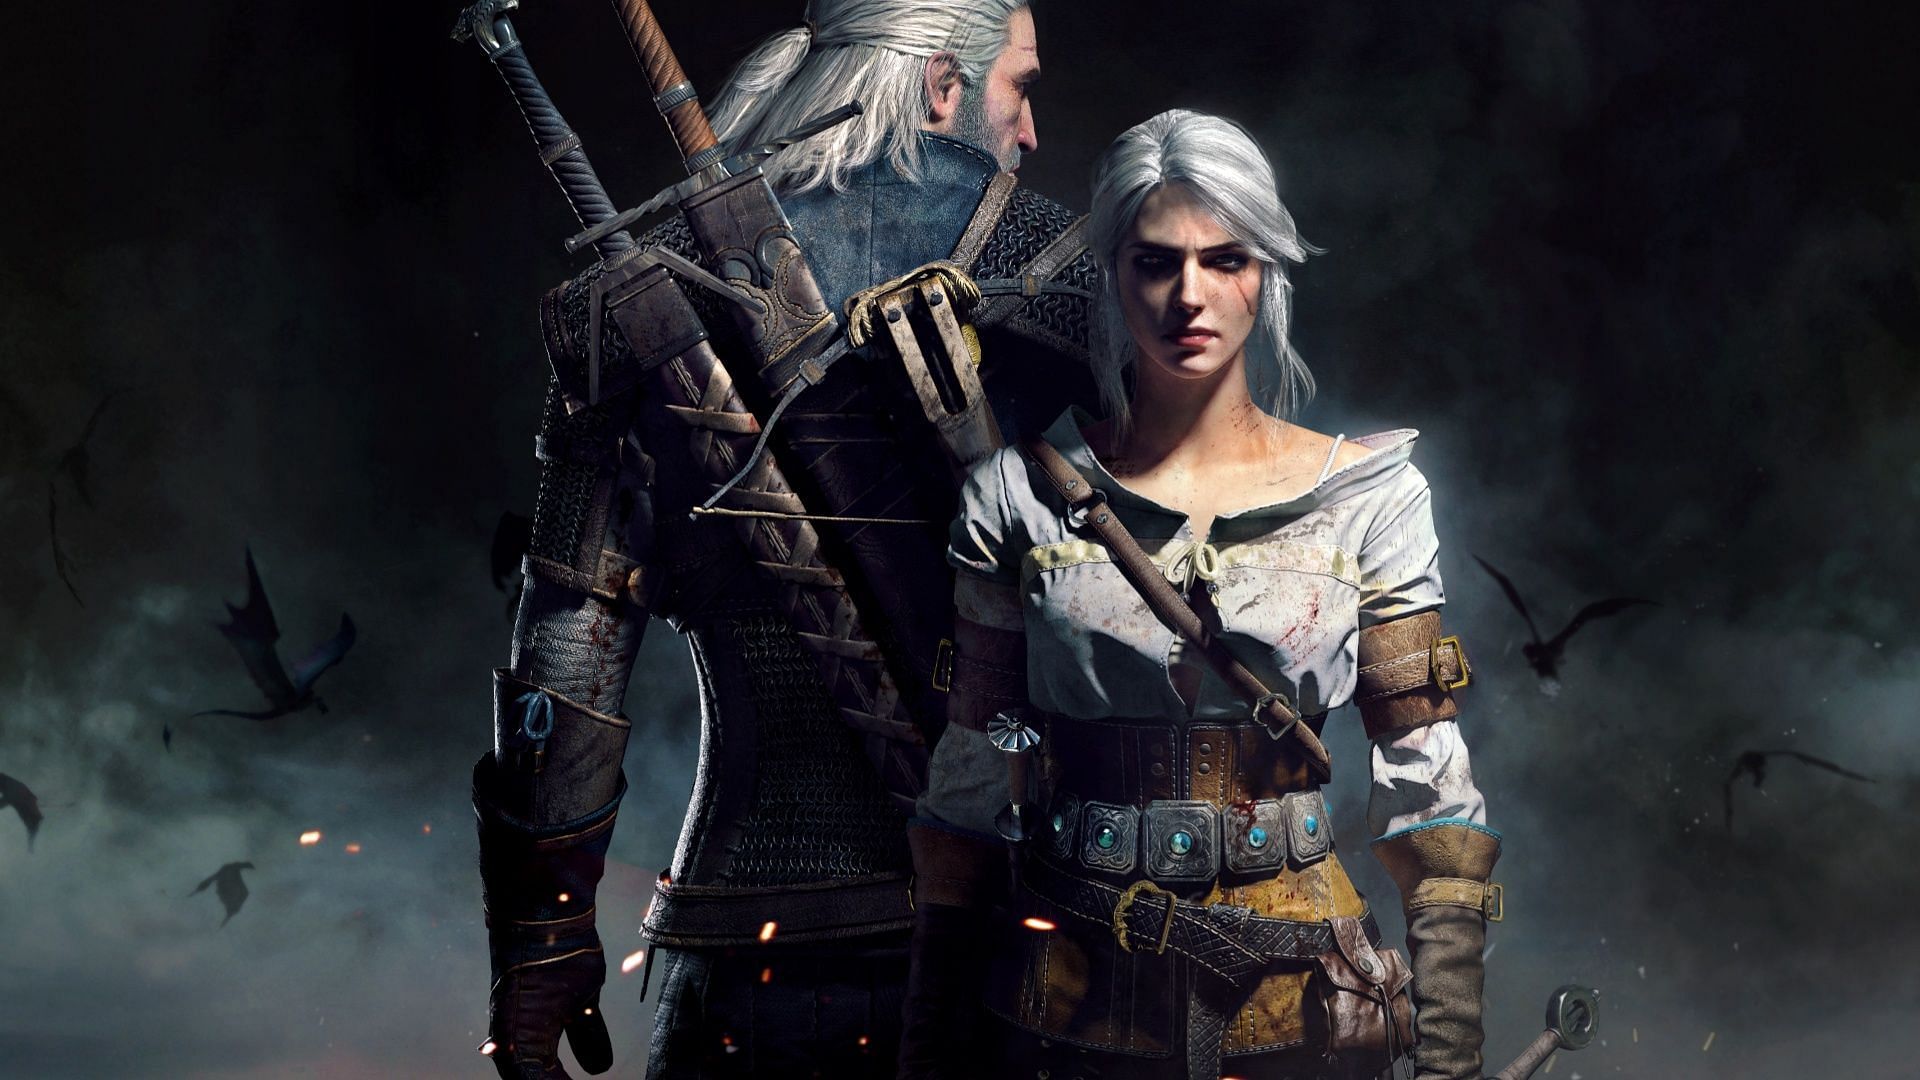 The Witcher 3 achievements: All trophies and how to unlock (Image via CDPR)